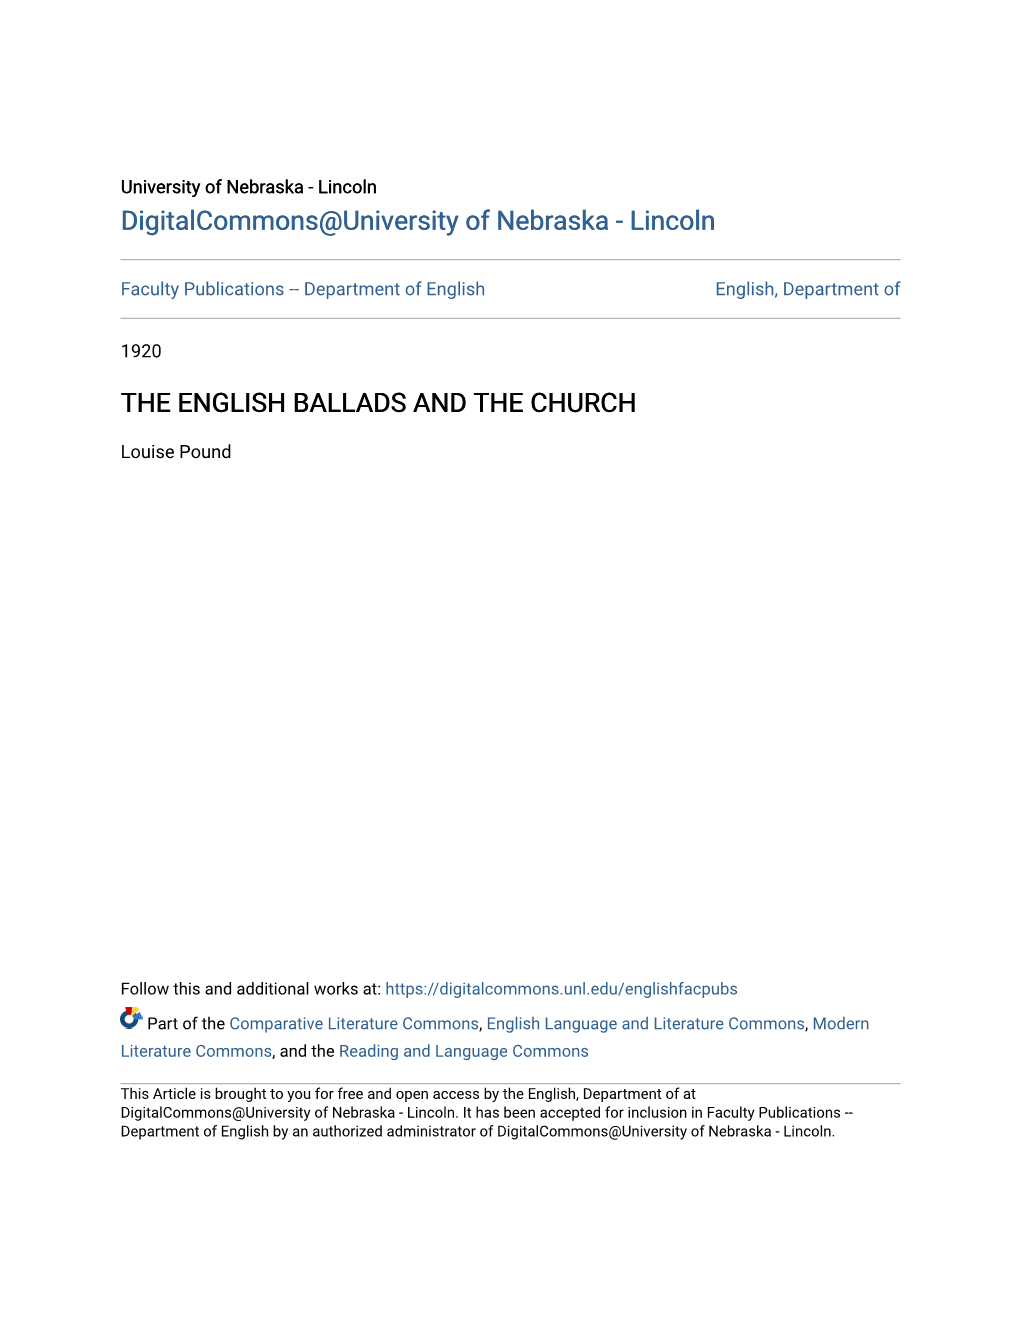 The English Ballads and the Church